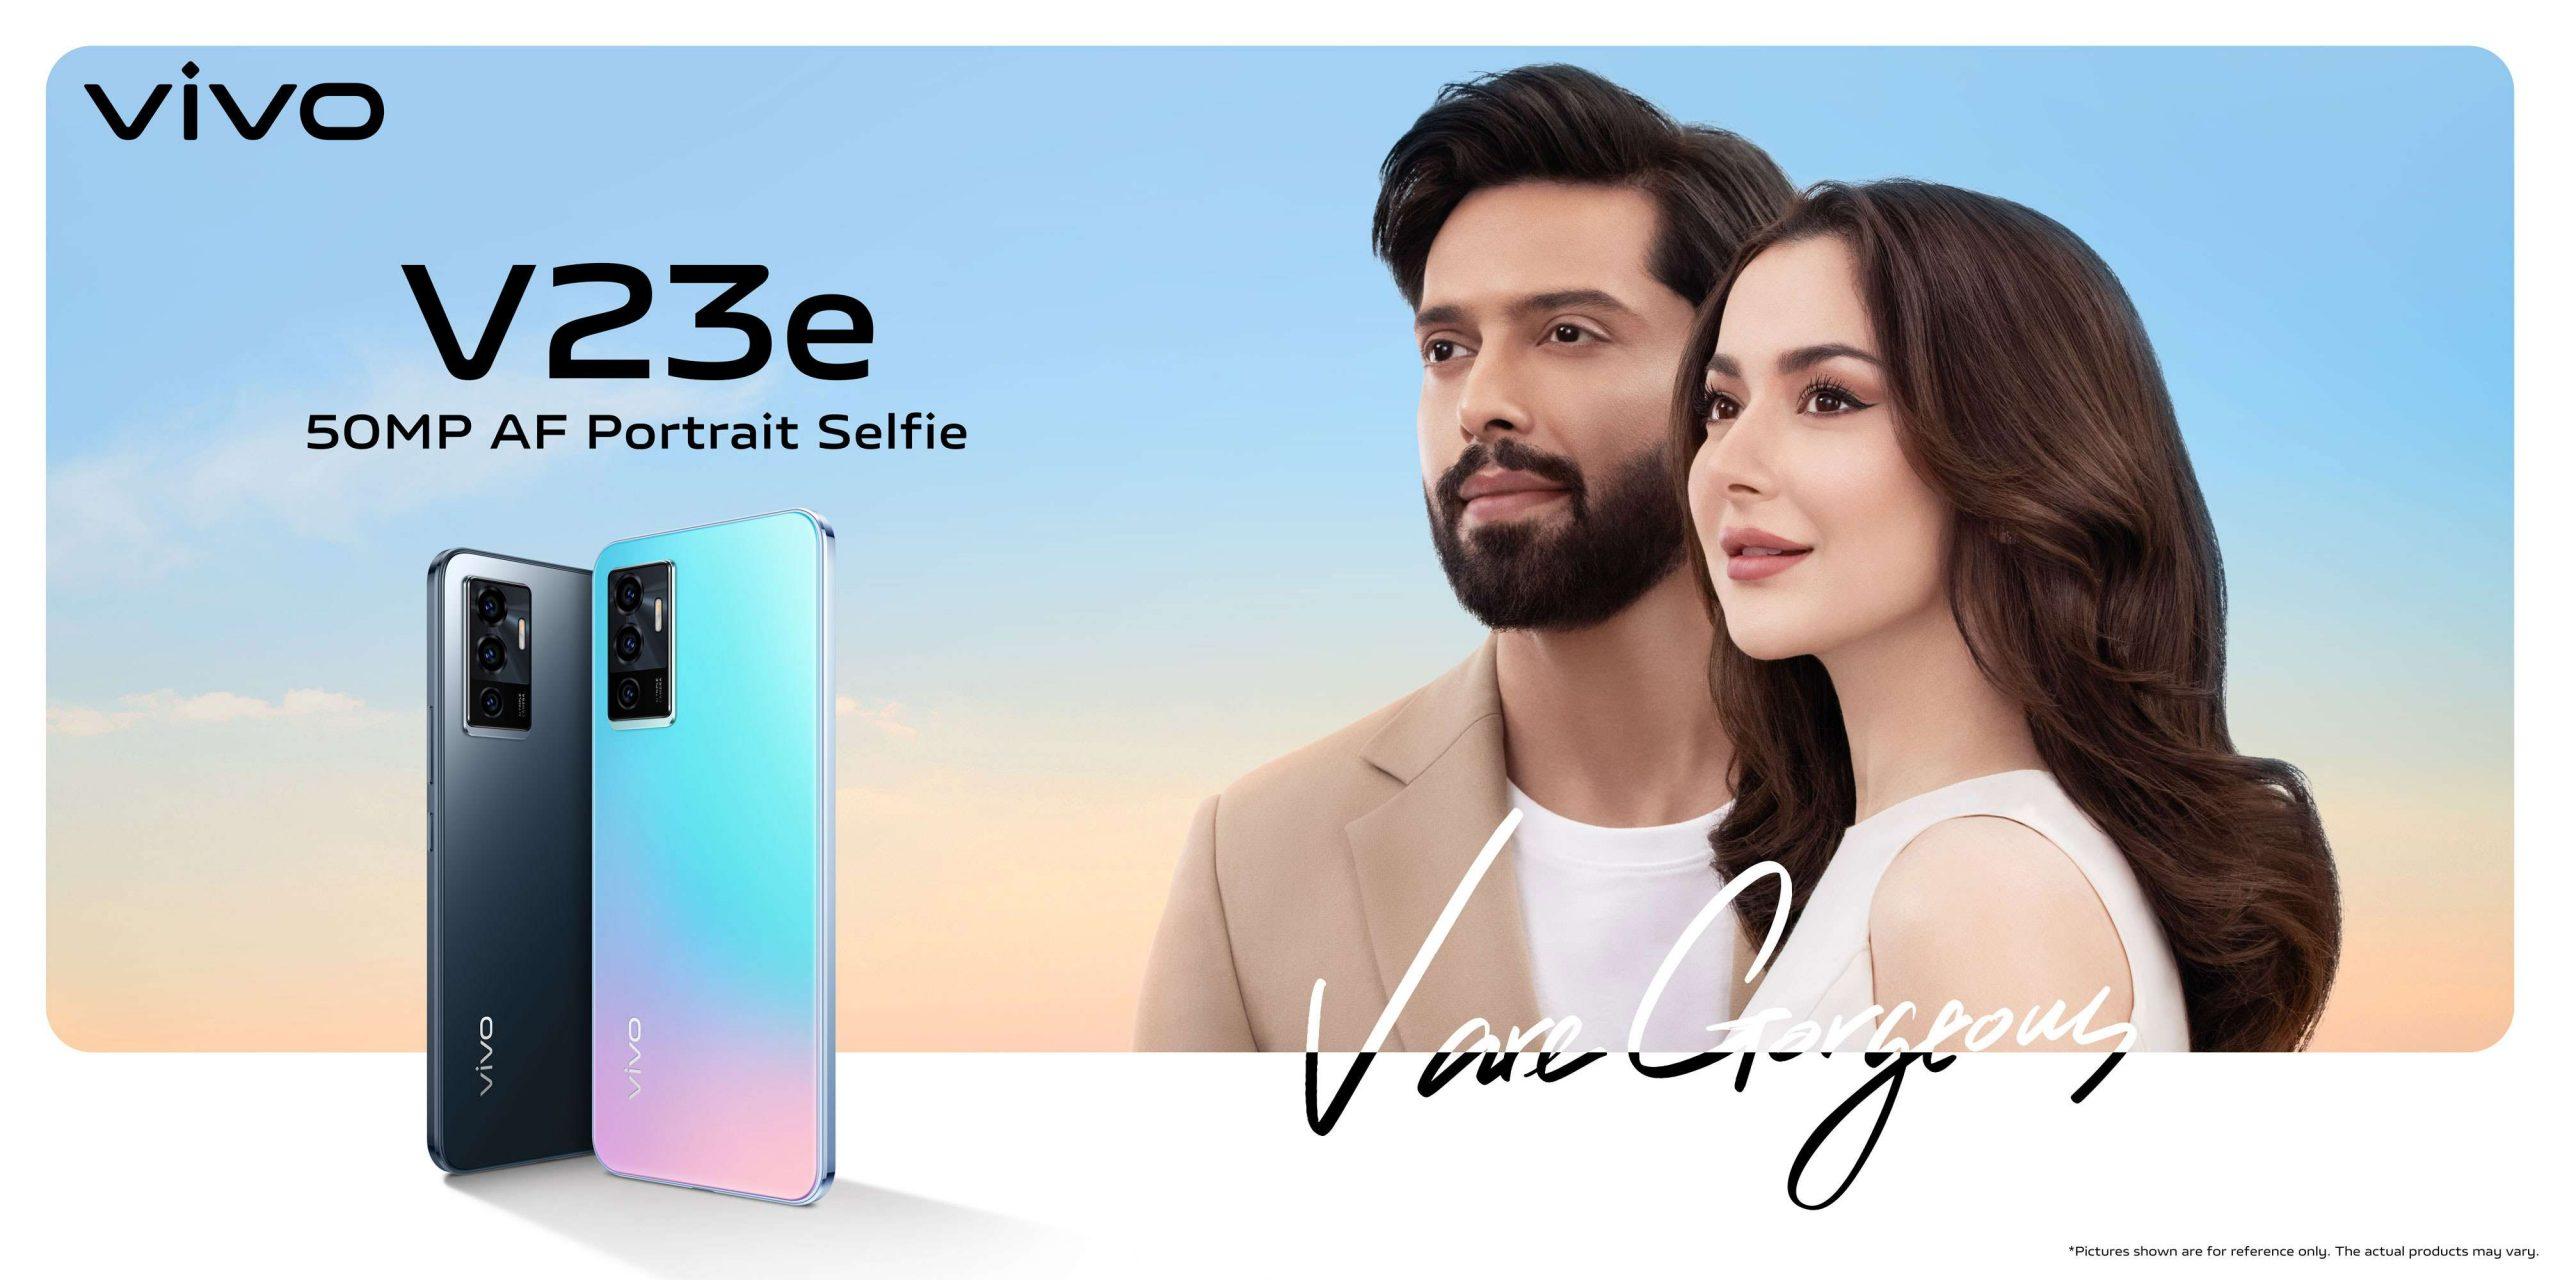 Curious to Know What Fahad & Hania Have to Say About vivo’s V23e? Let’s Hear It Straight from Them!